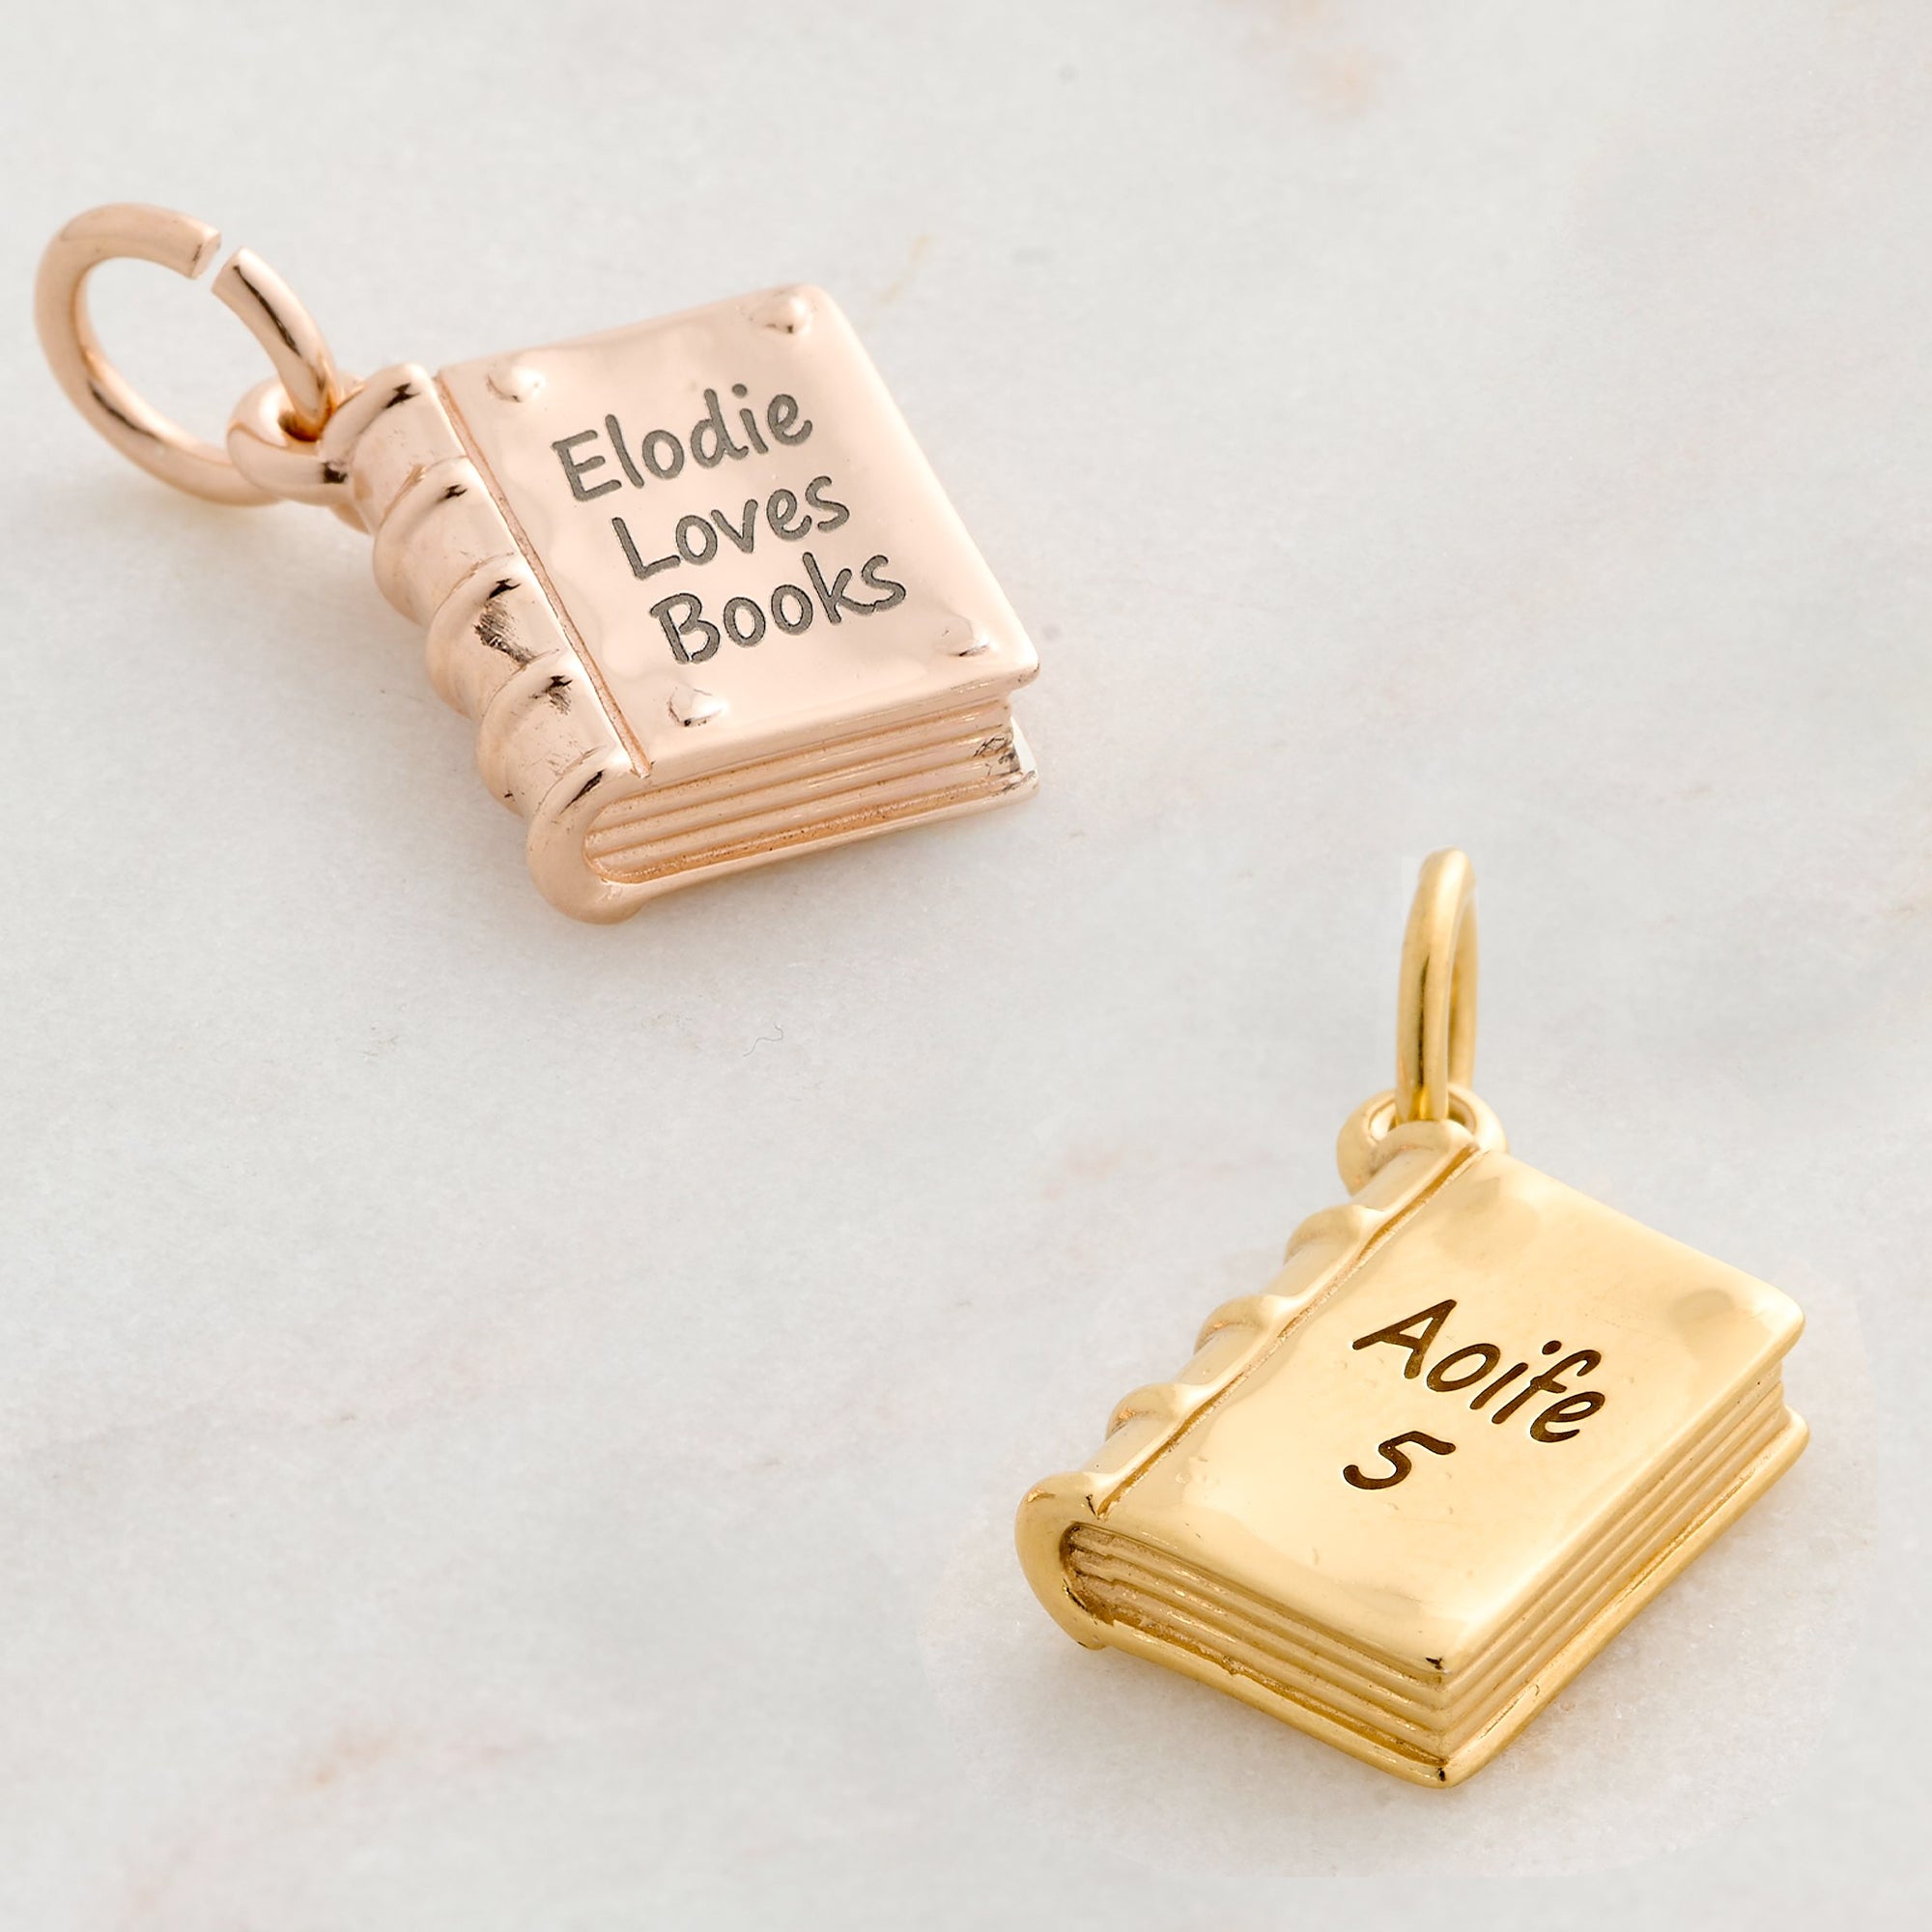 gold plated silver book charm engraved with date for birthday gift charm bracelet pendant